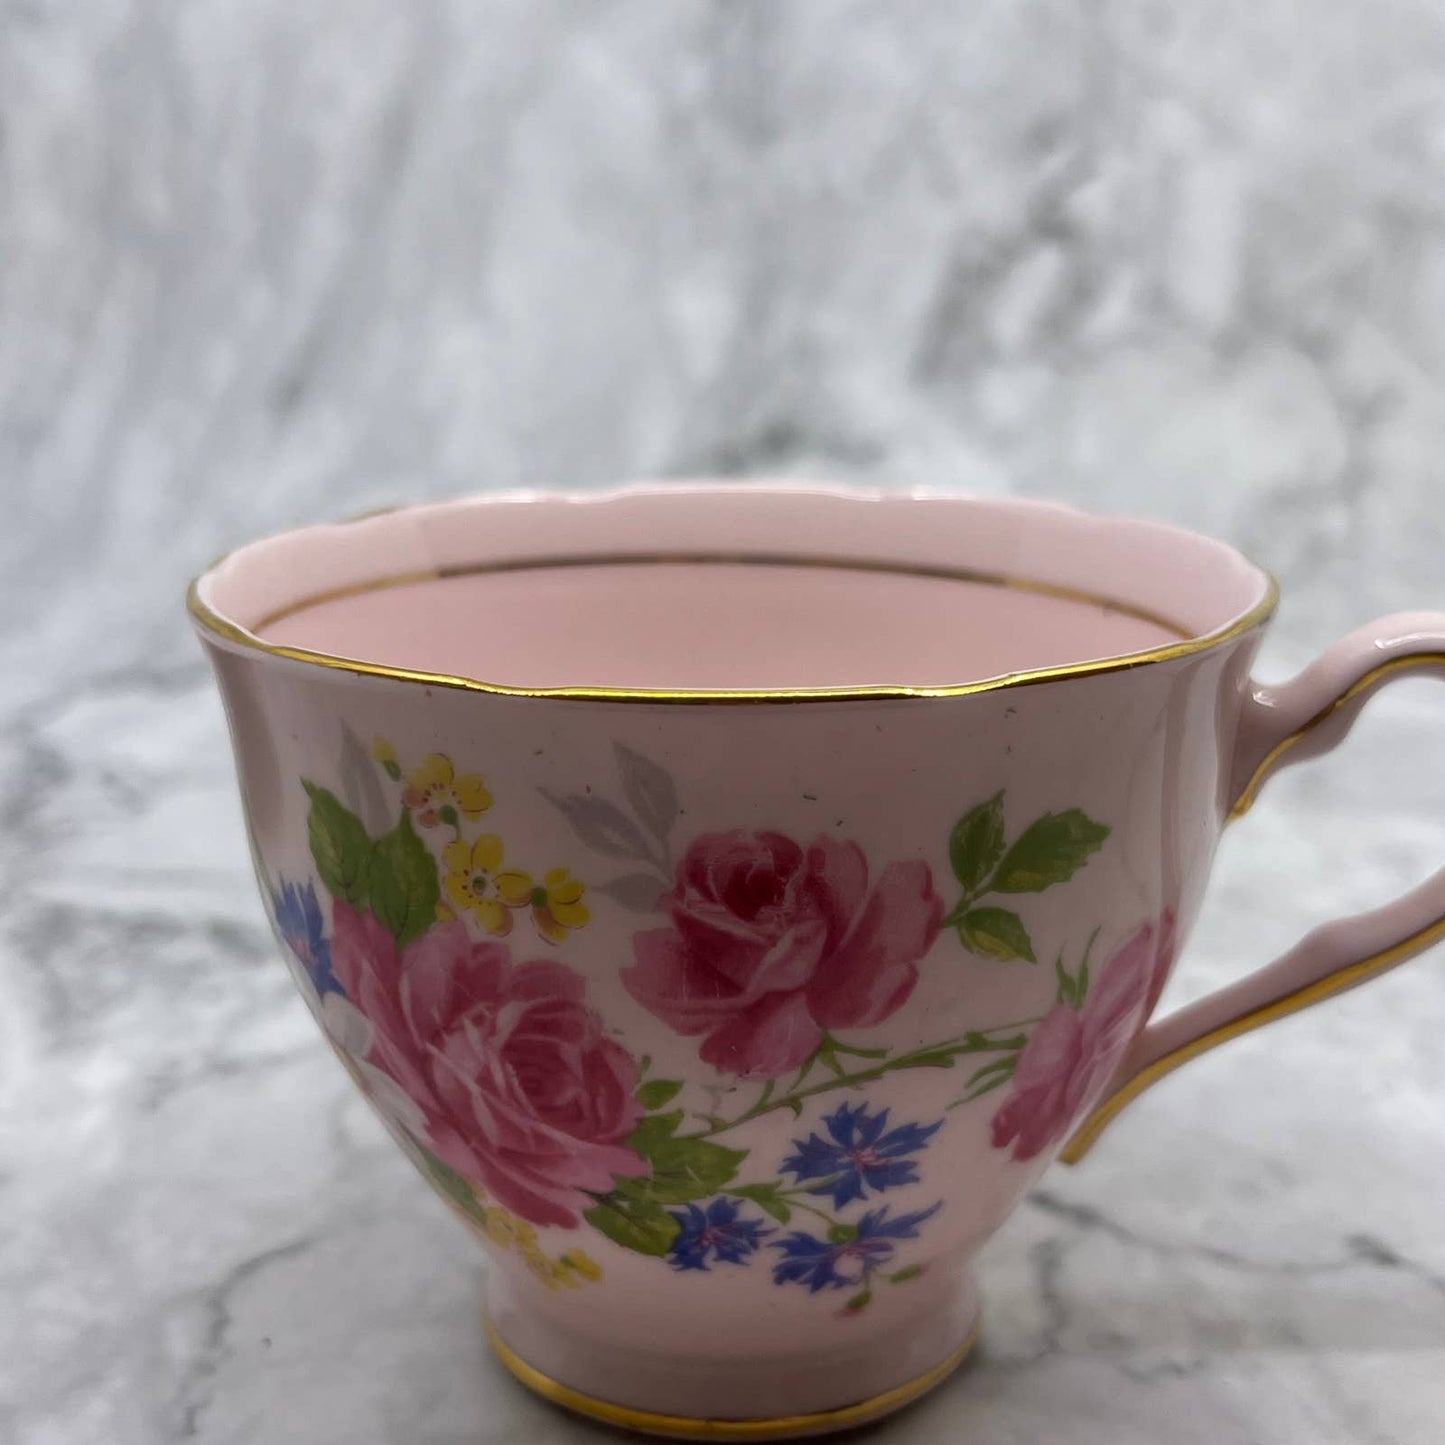 Colclough Pink Floral Tea Cup and Saucer, 8014, Made in England TD1